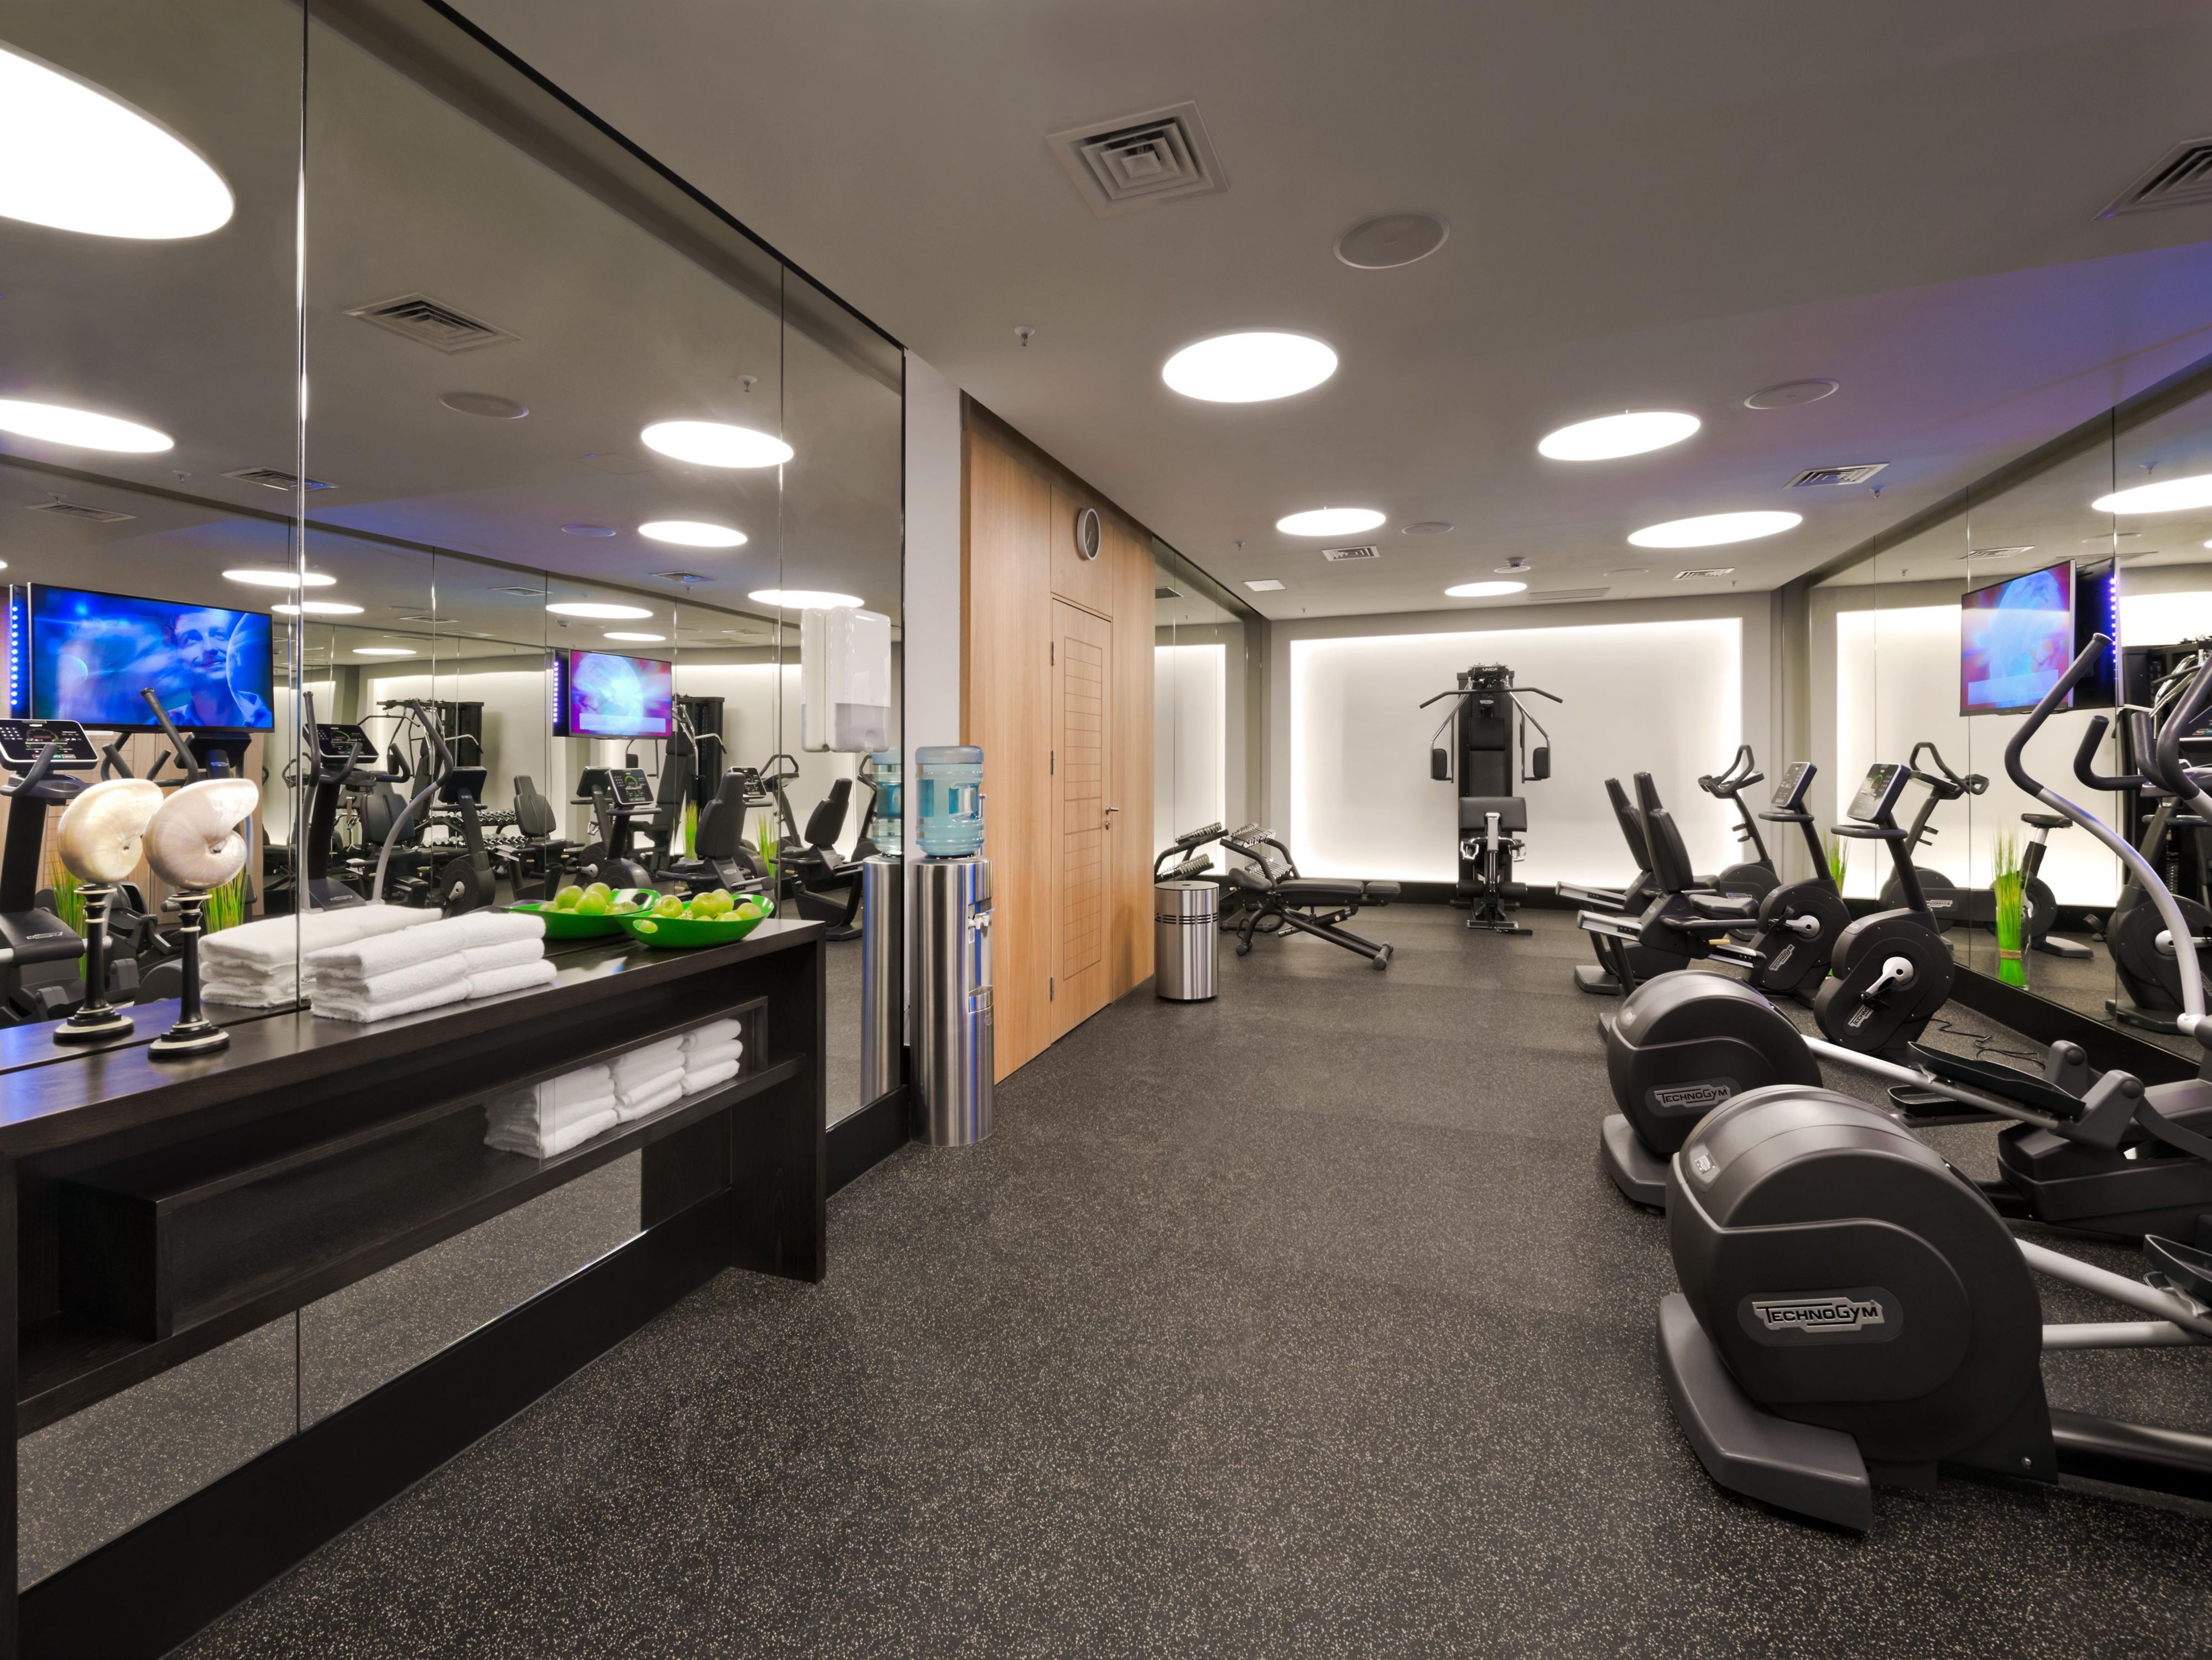 Unwind after an eventful day in our spa and relax in the sauna or steam bath. The 24-hour Fitness Center includes free weights, bikes and running machines. Check family opening hours at reception.